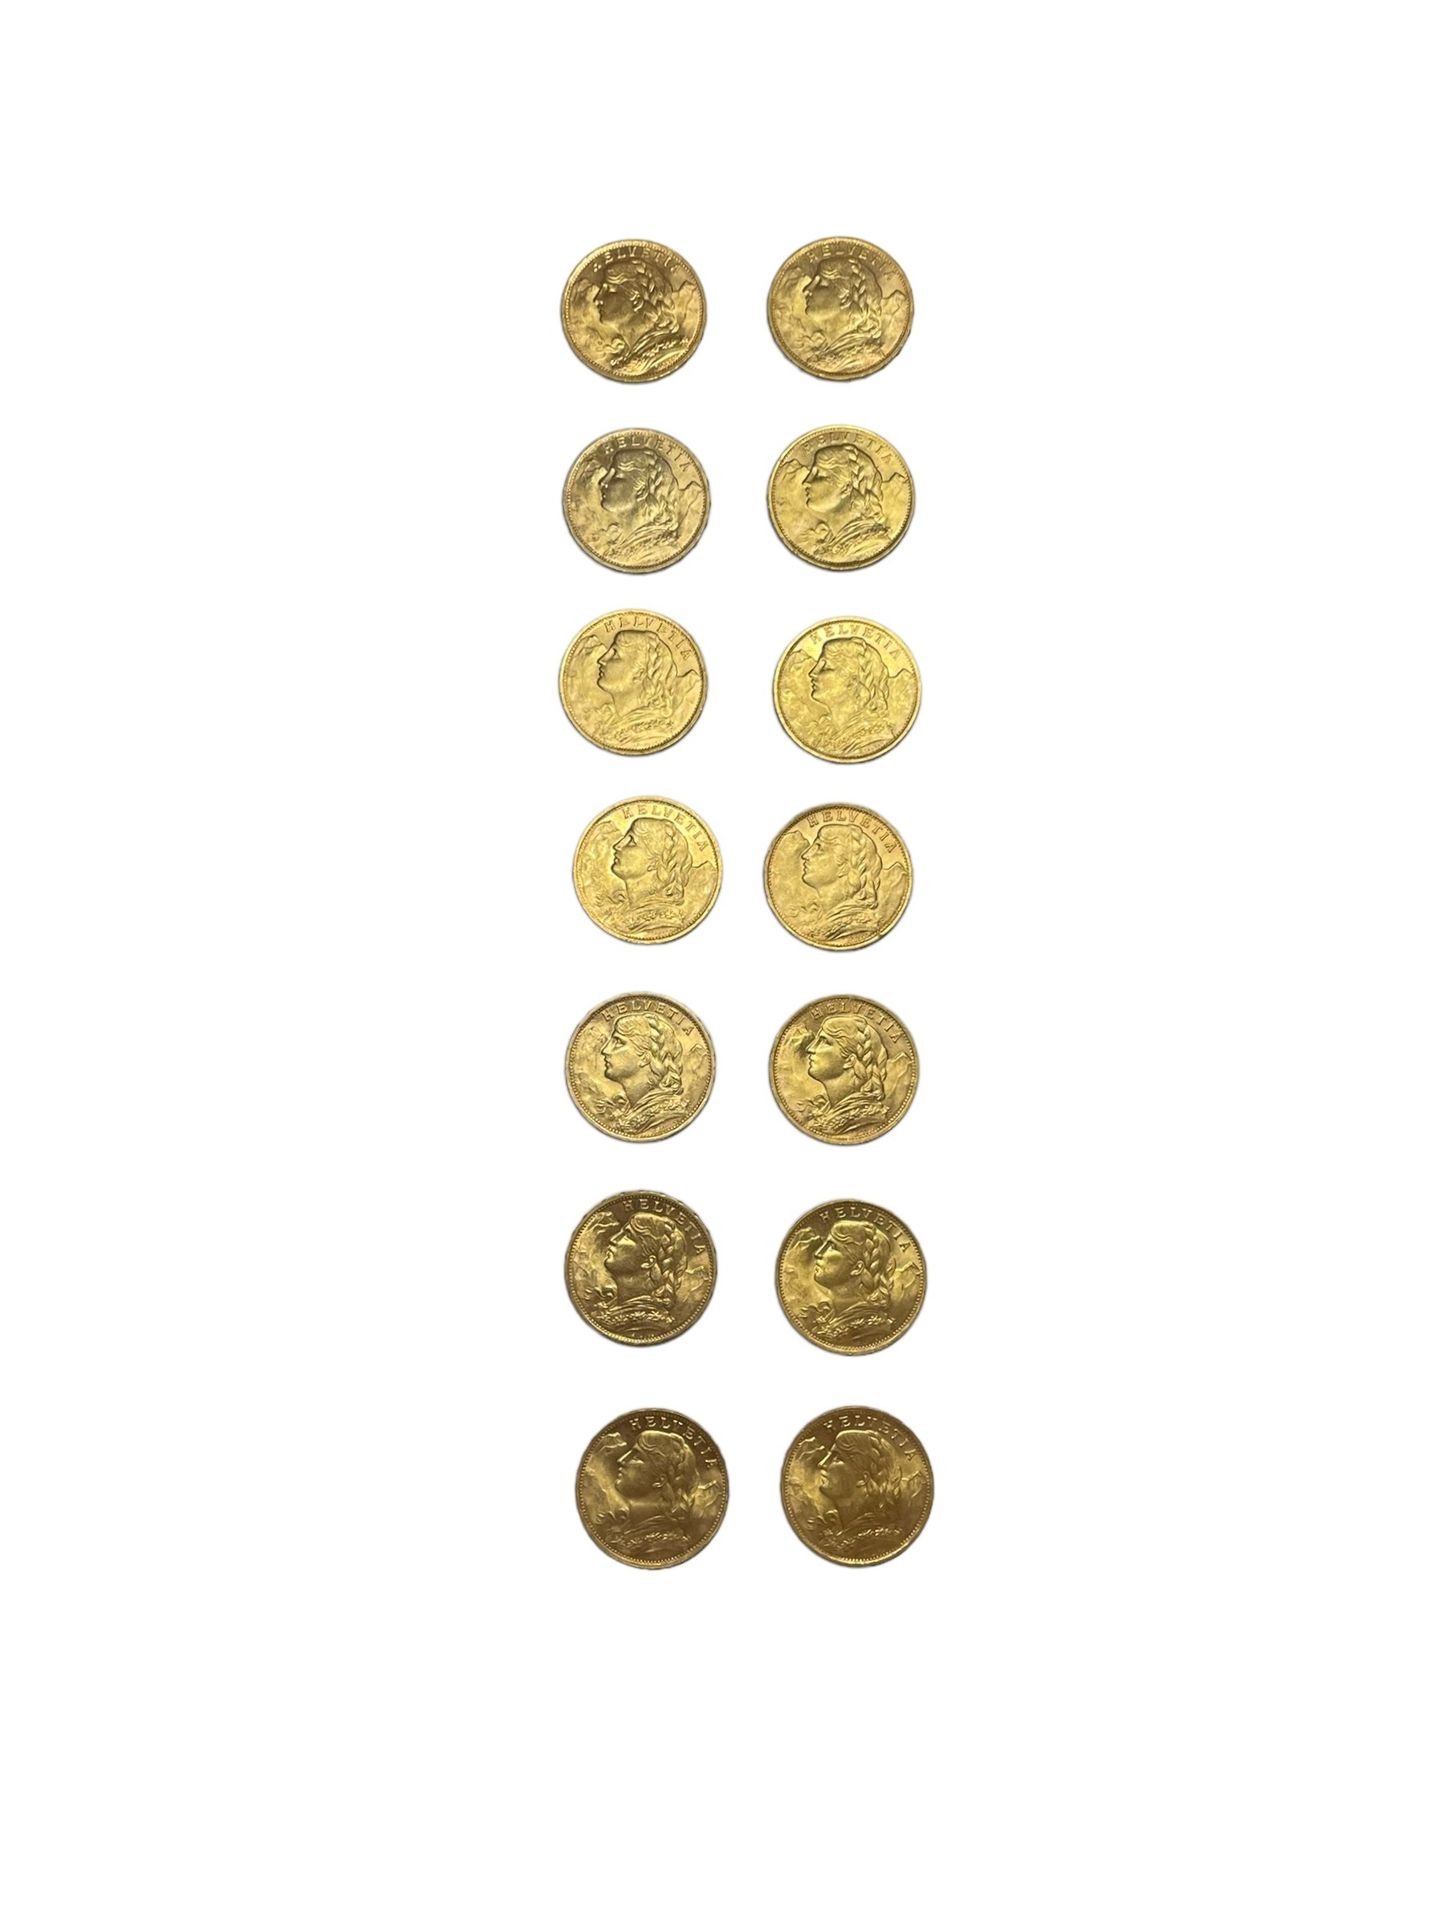 Null SWITZERLAND
14 pieces 20 francs gold
Weight : 90.2 g